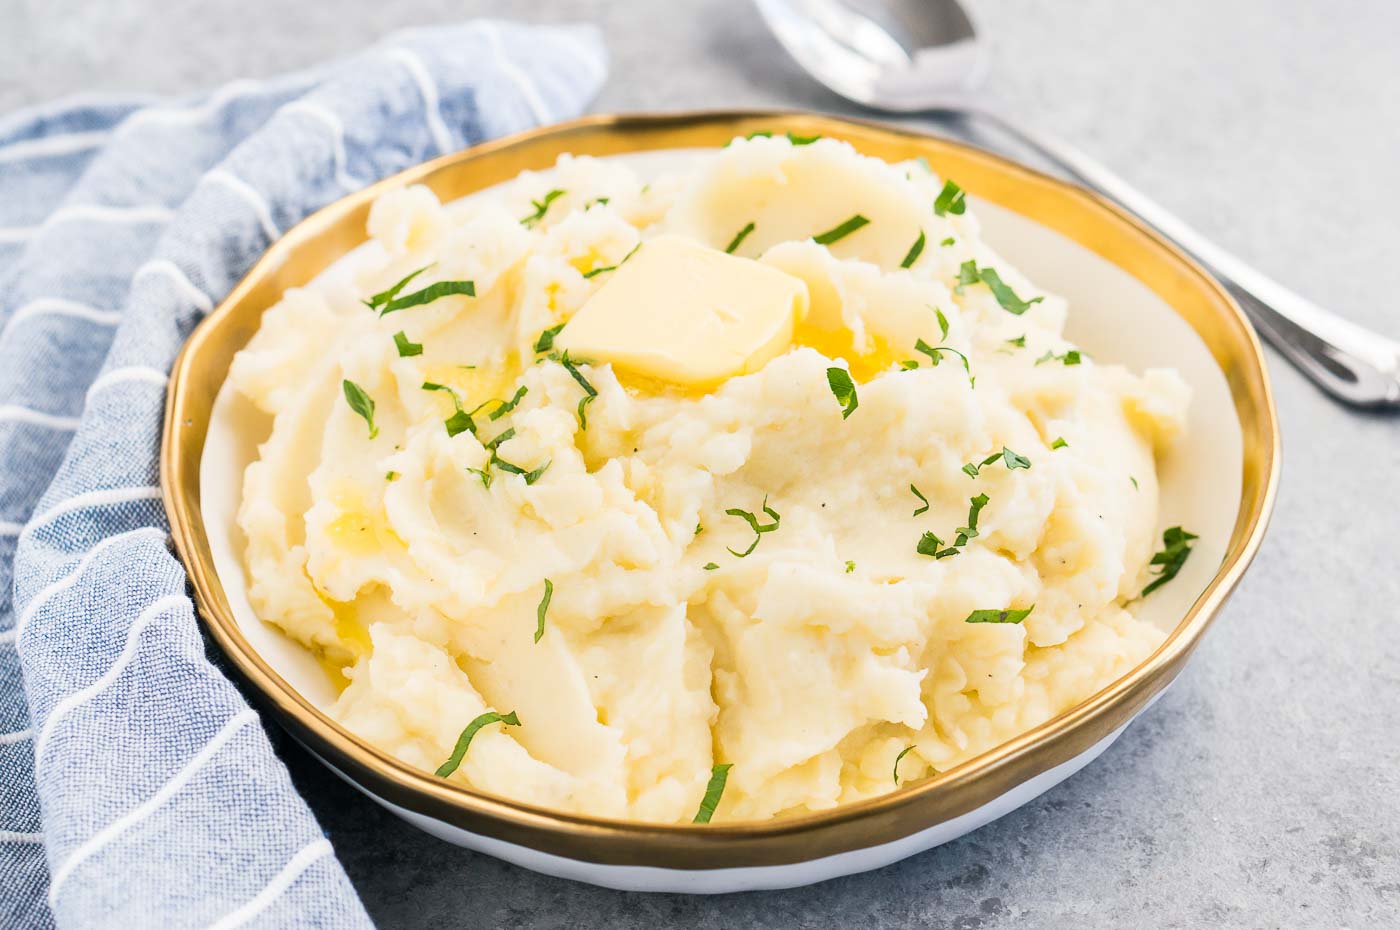 close up image of mashed potatoes in a bowl